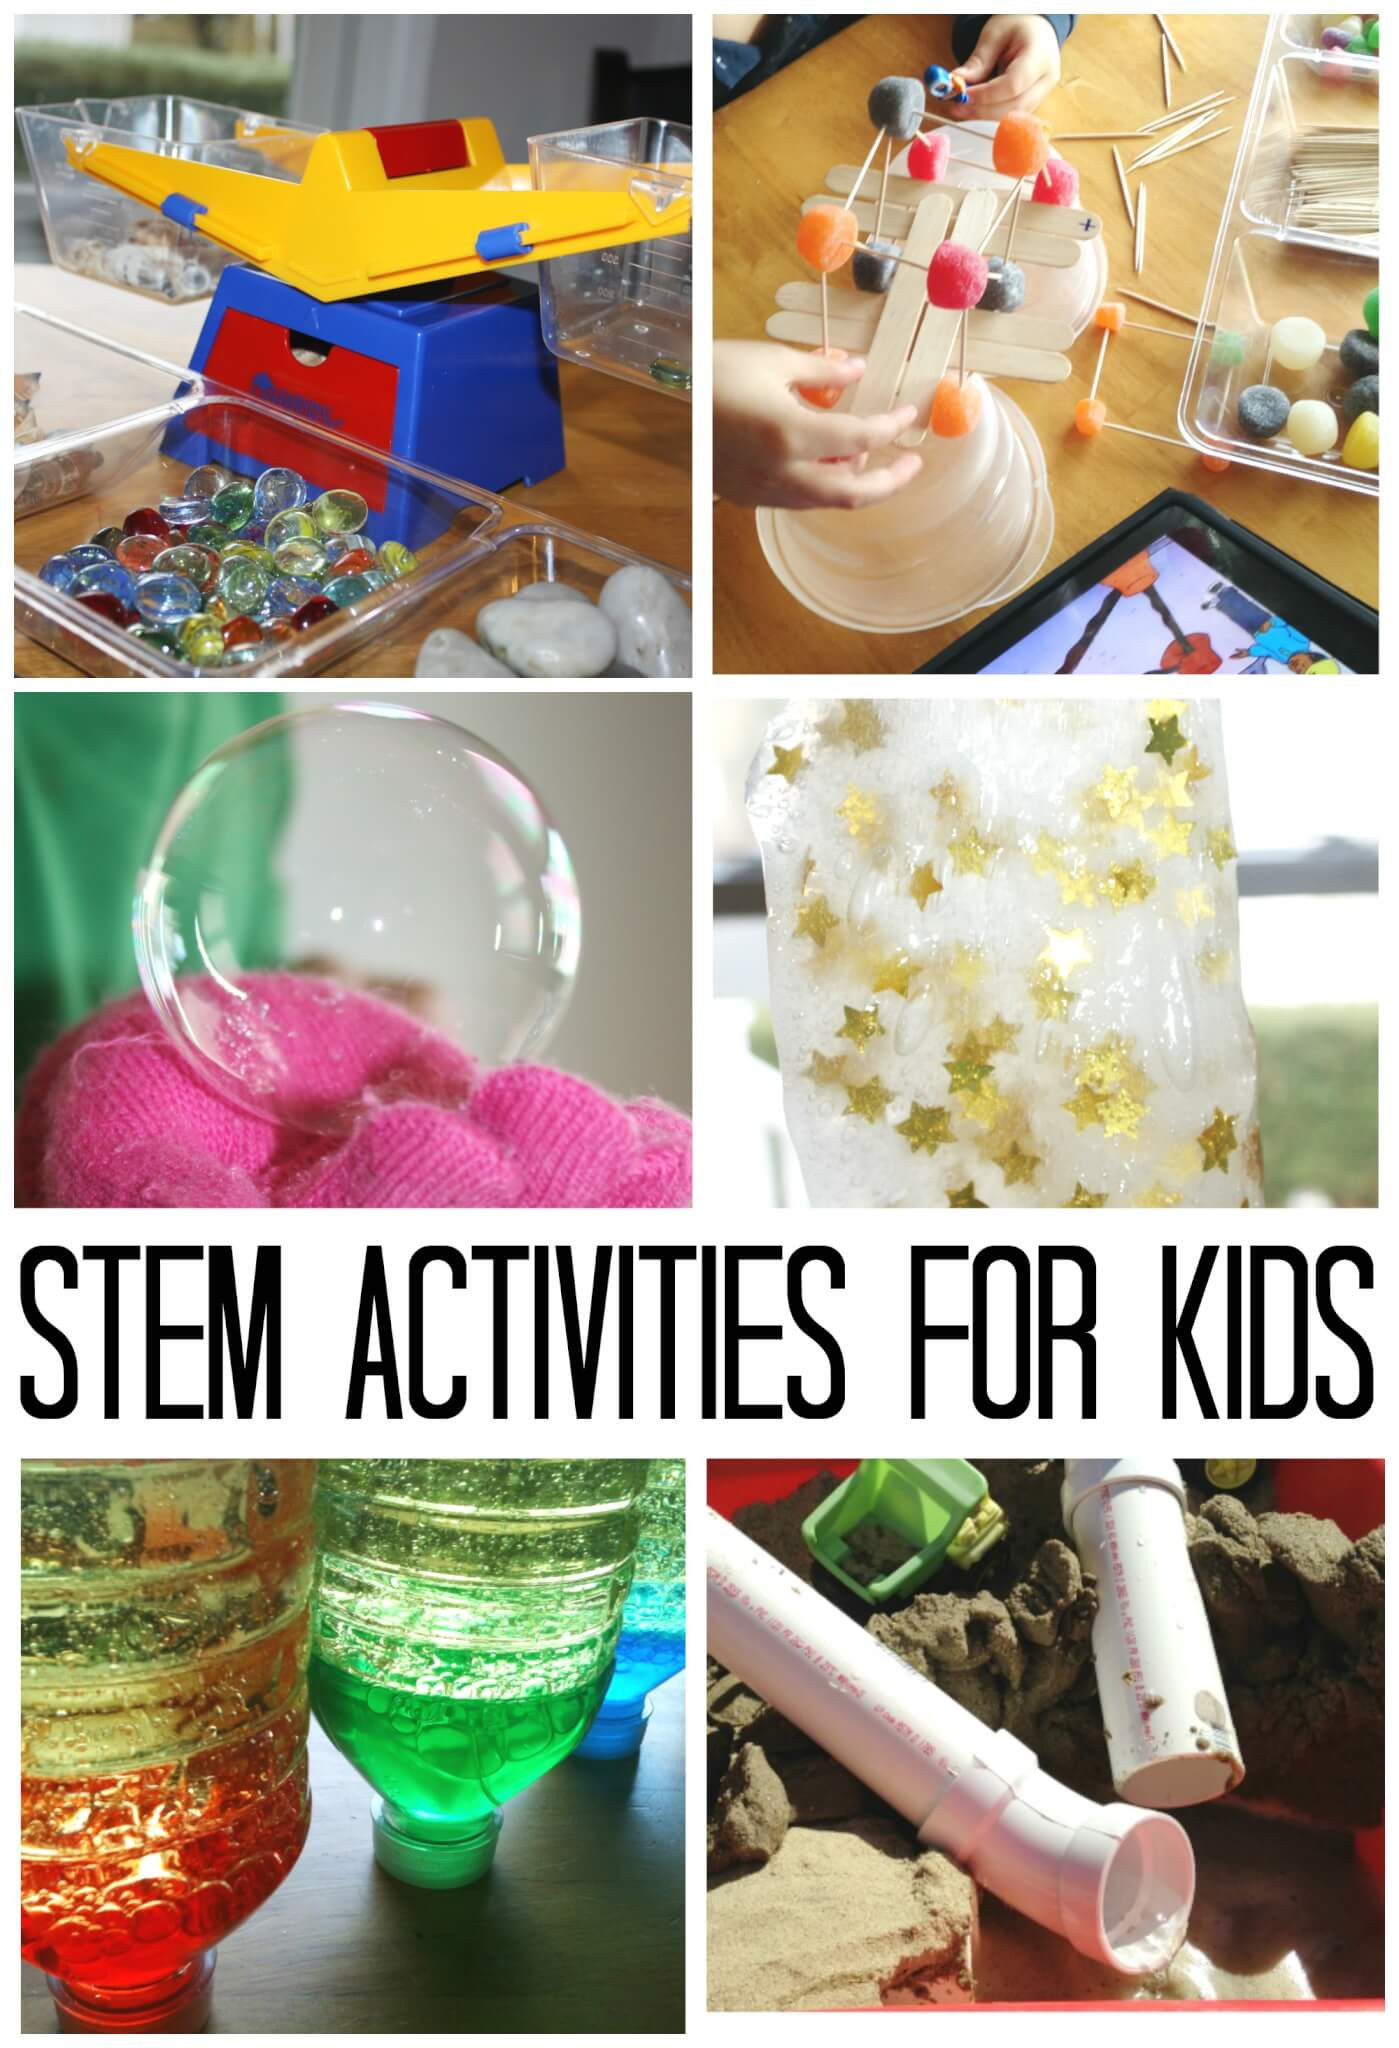 Project Ideas For Kids
 Science Experiments and STEM Activities for Kids